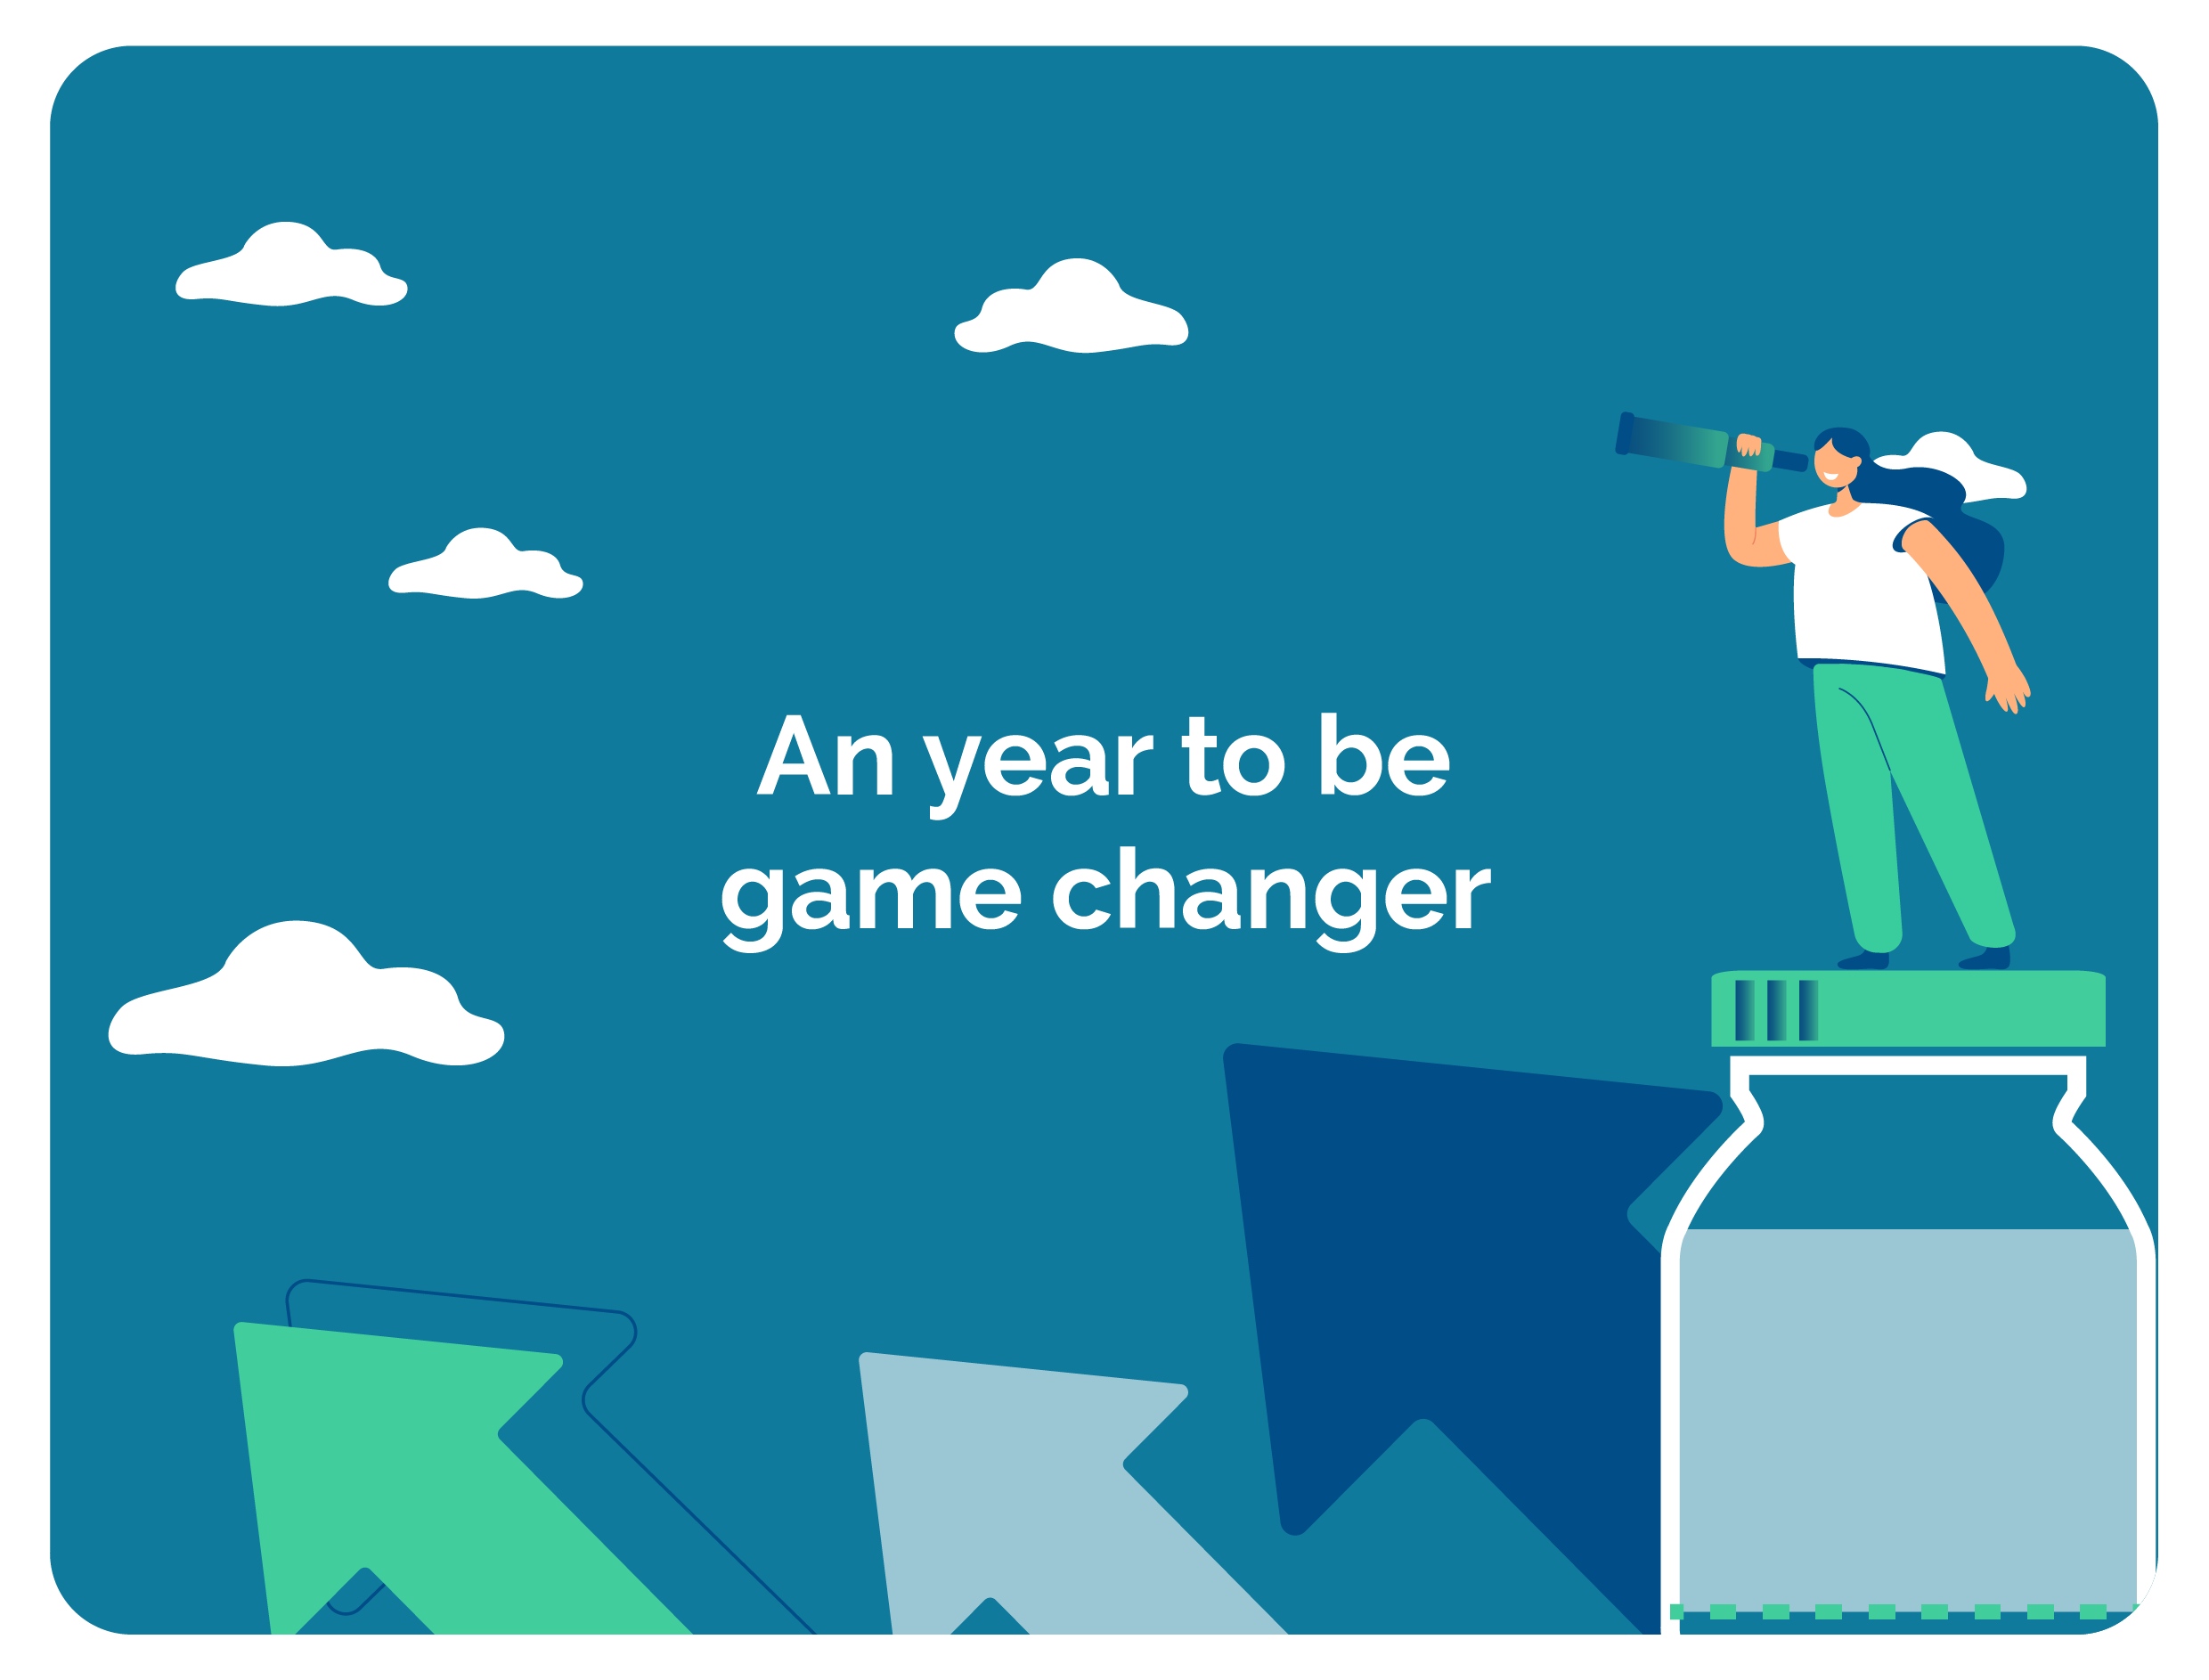 An year to be game changer